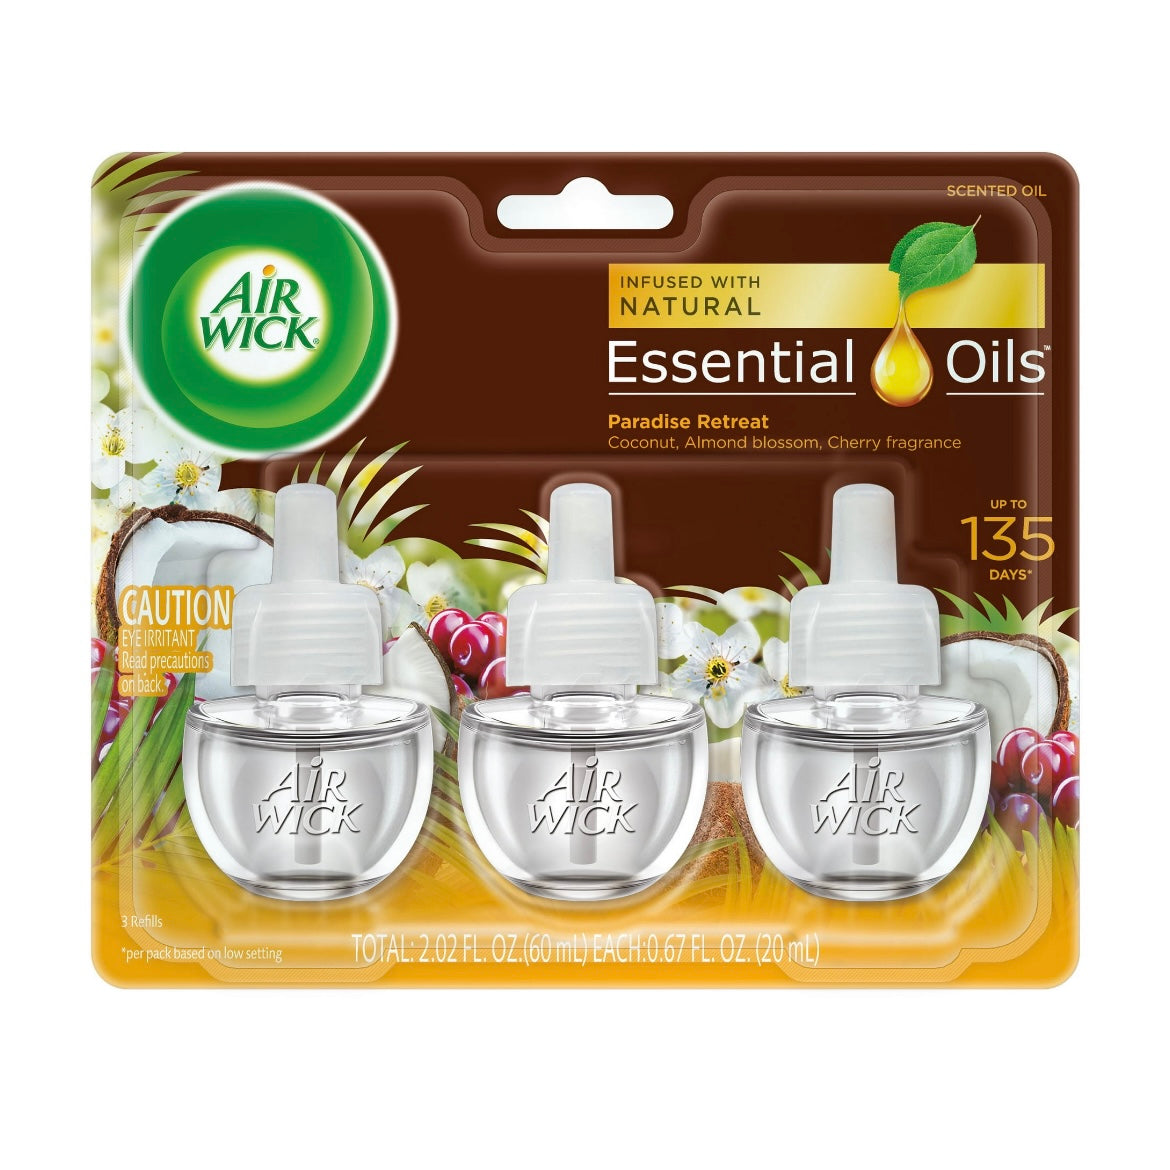 Plug In Scented Oil Refills